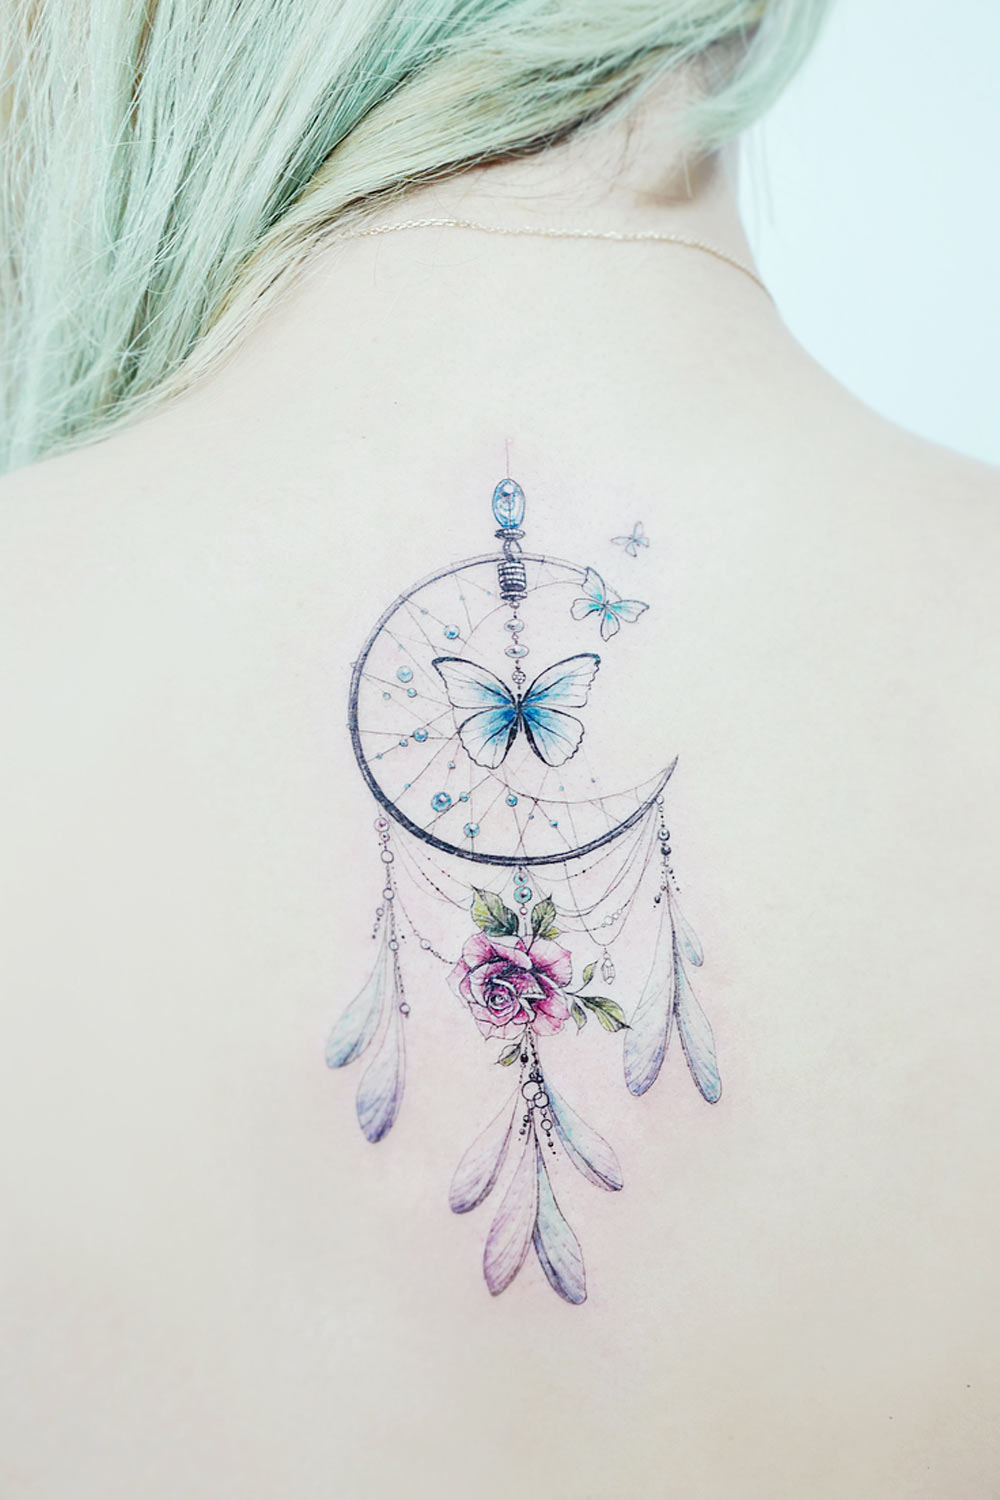 Dream Catcher with Butterfly in Center Tattoo Design